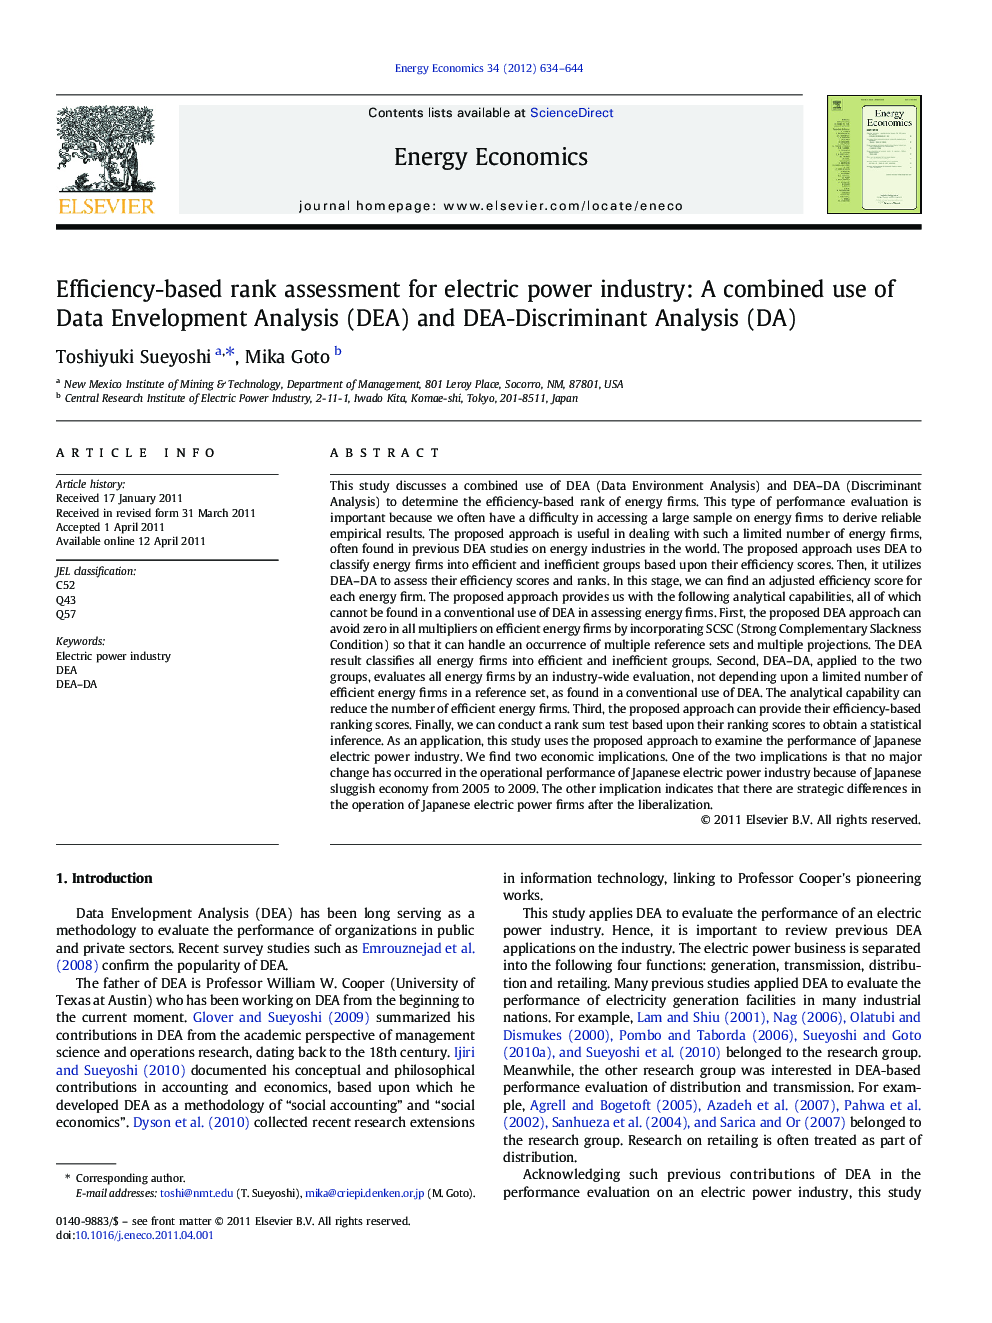 Efficiency-based rank assessment for electric power industry: A combined use of Data Envelopment Analysis (DEA) and DEA-Discriminant Analysis (DA)